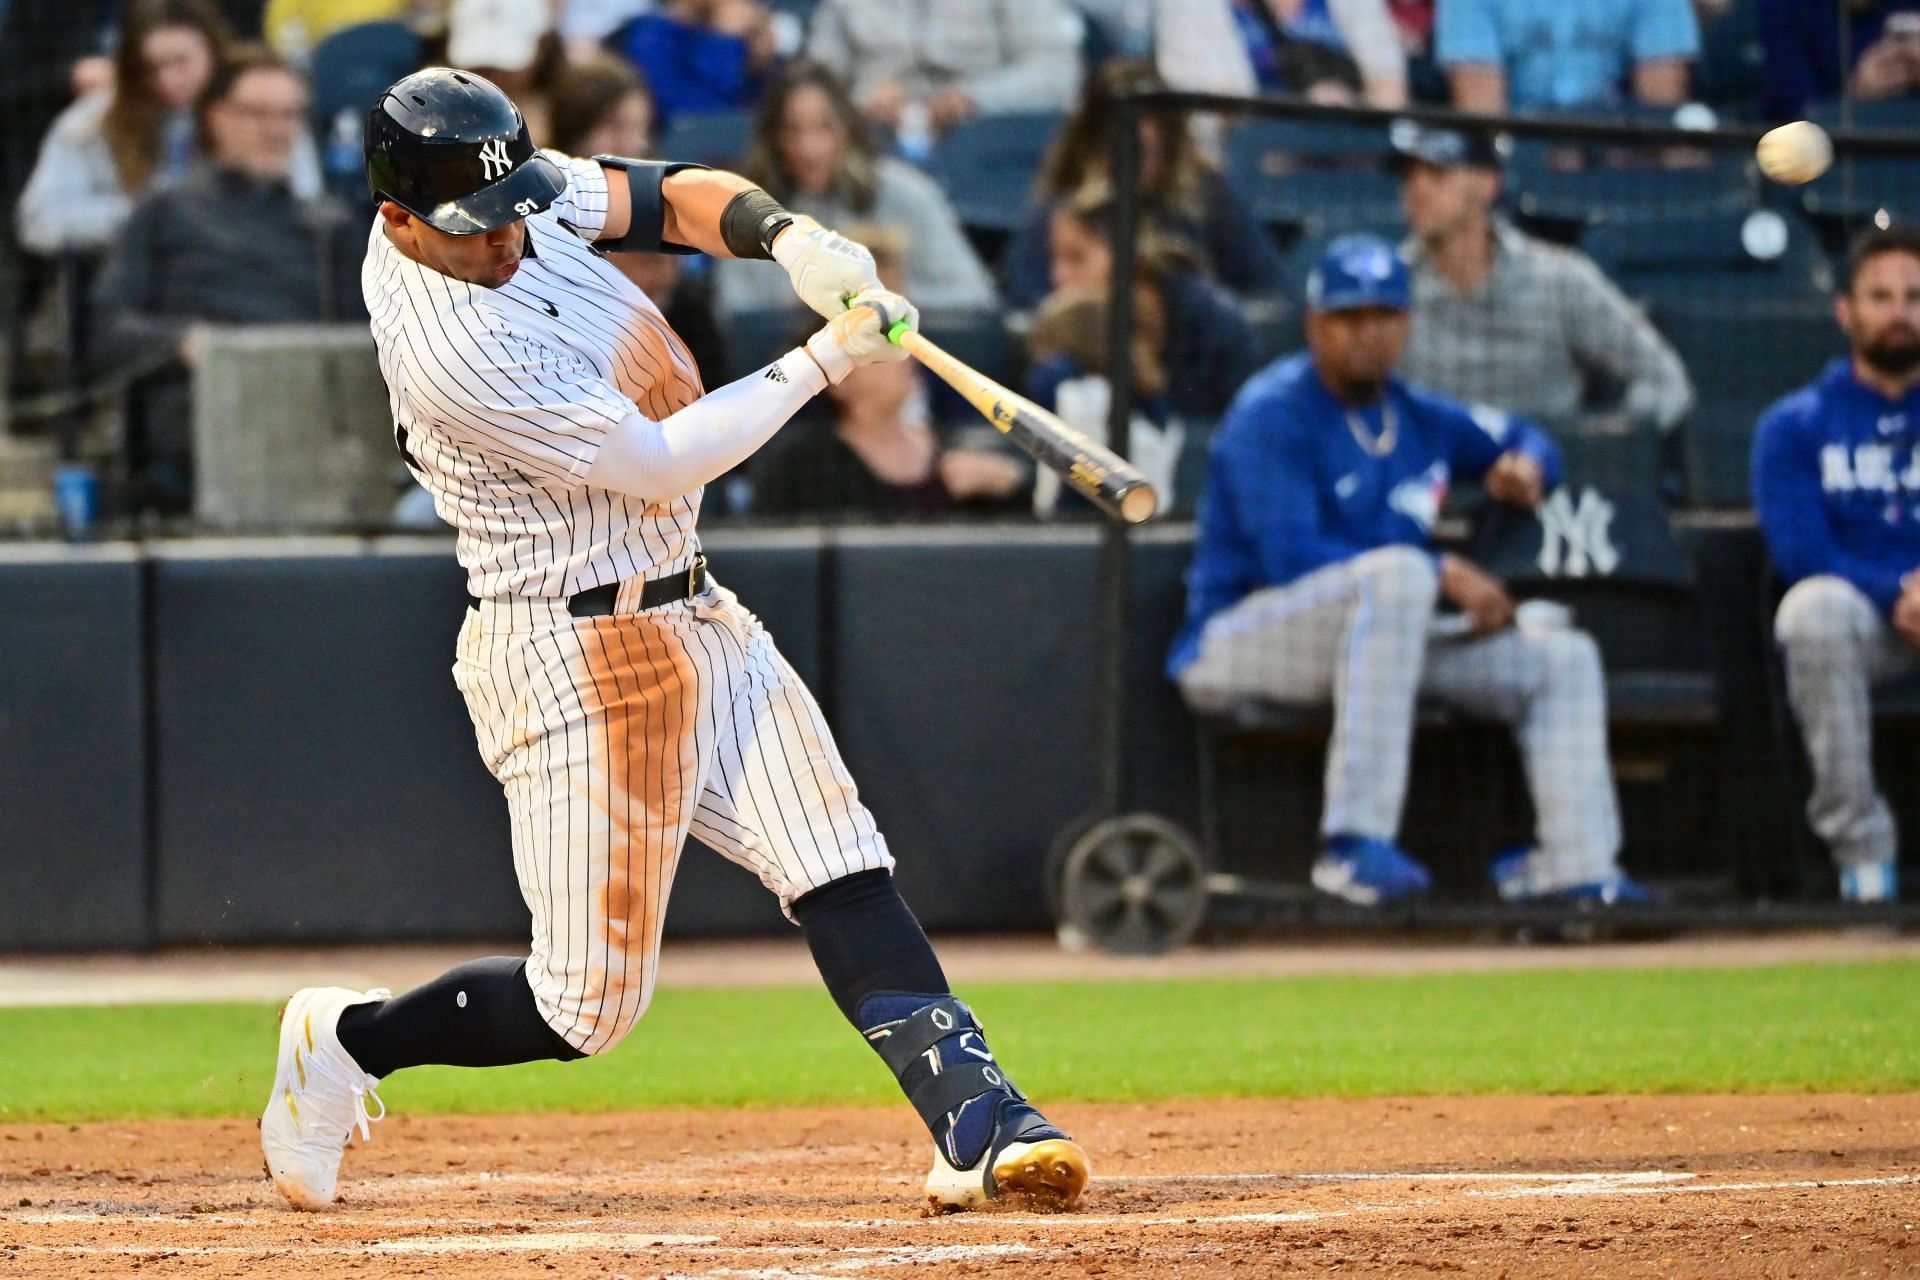 Oswald Peraza #91 of the New York Yankees hits a home run in the third inning against the Toronto Blue Jays during a Grapefruit League Spring Training Game at George M. Steinbrenner Field on March 14, 2023 in Tampa, Florida.